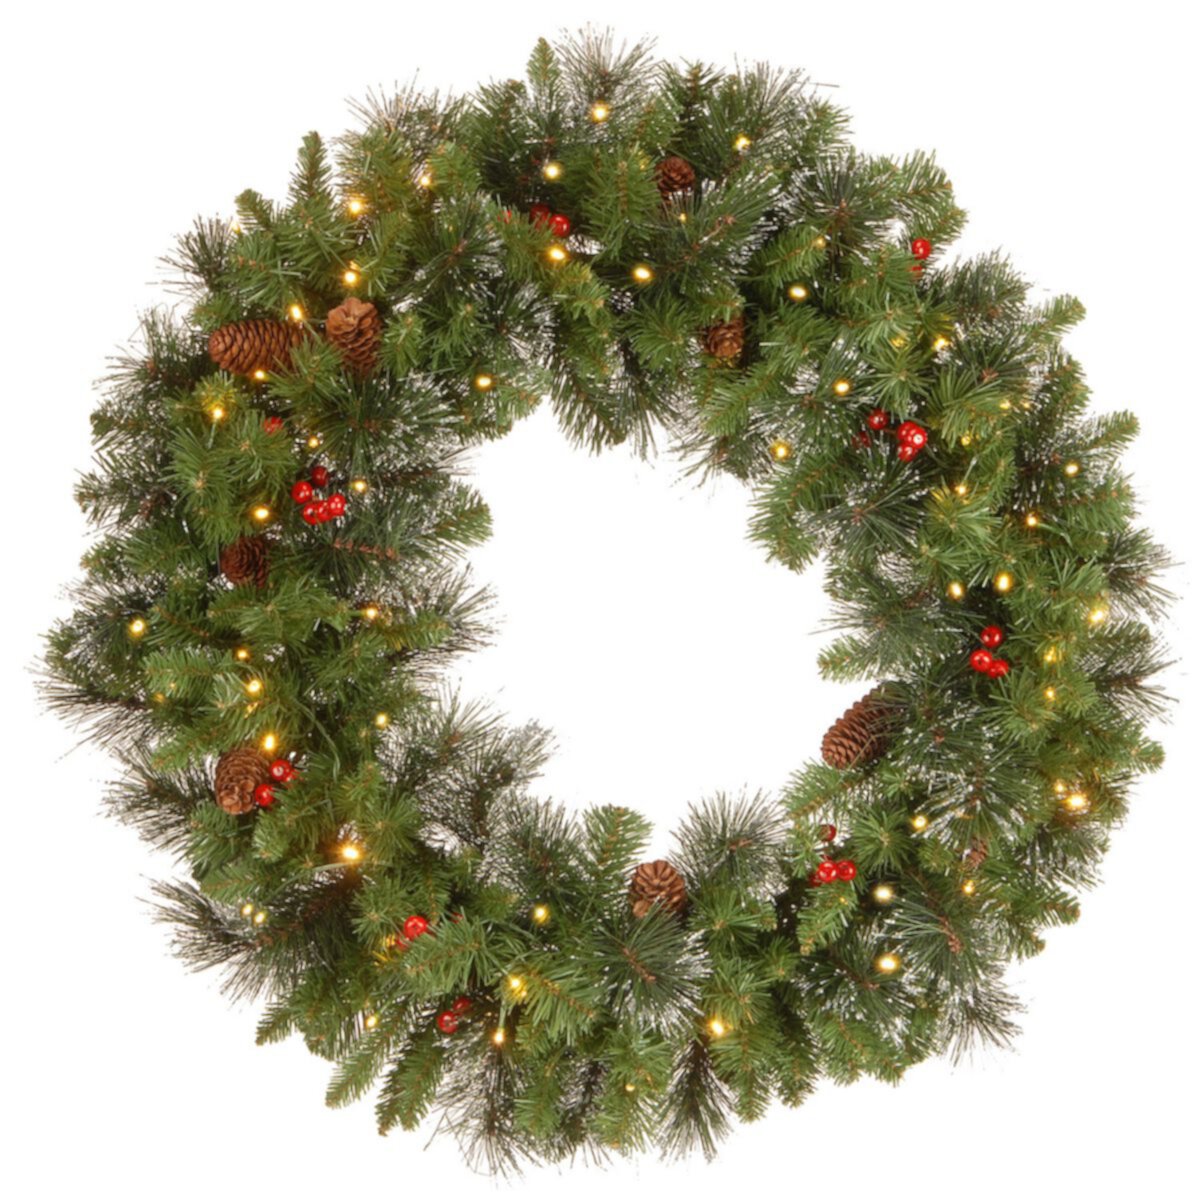 National Tree Company 30-in. Crestwood® Spruce Artificial Wreath with Pine Cones, Red Berries & Twinkly™ Lights National Tree Company